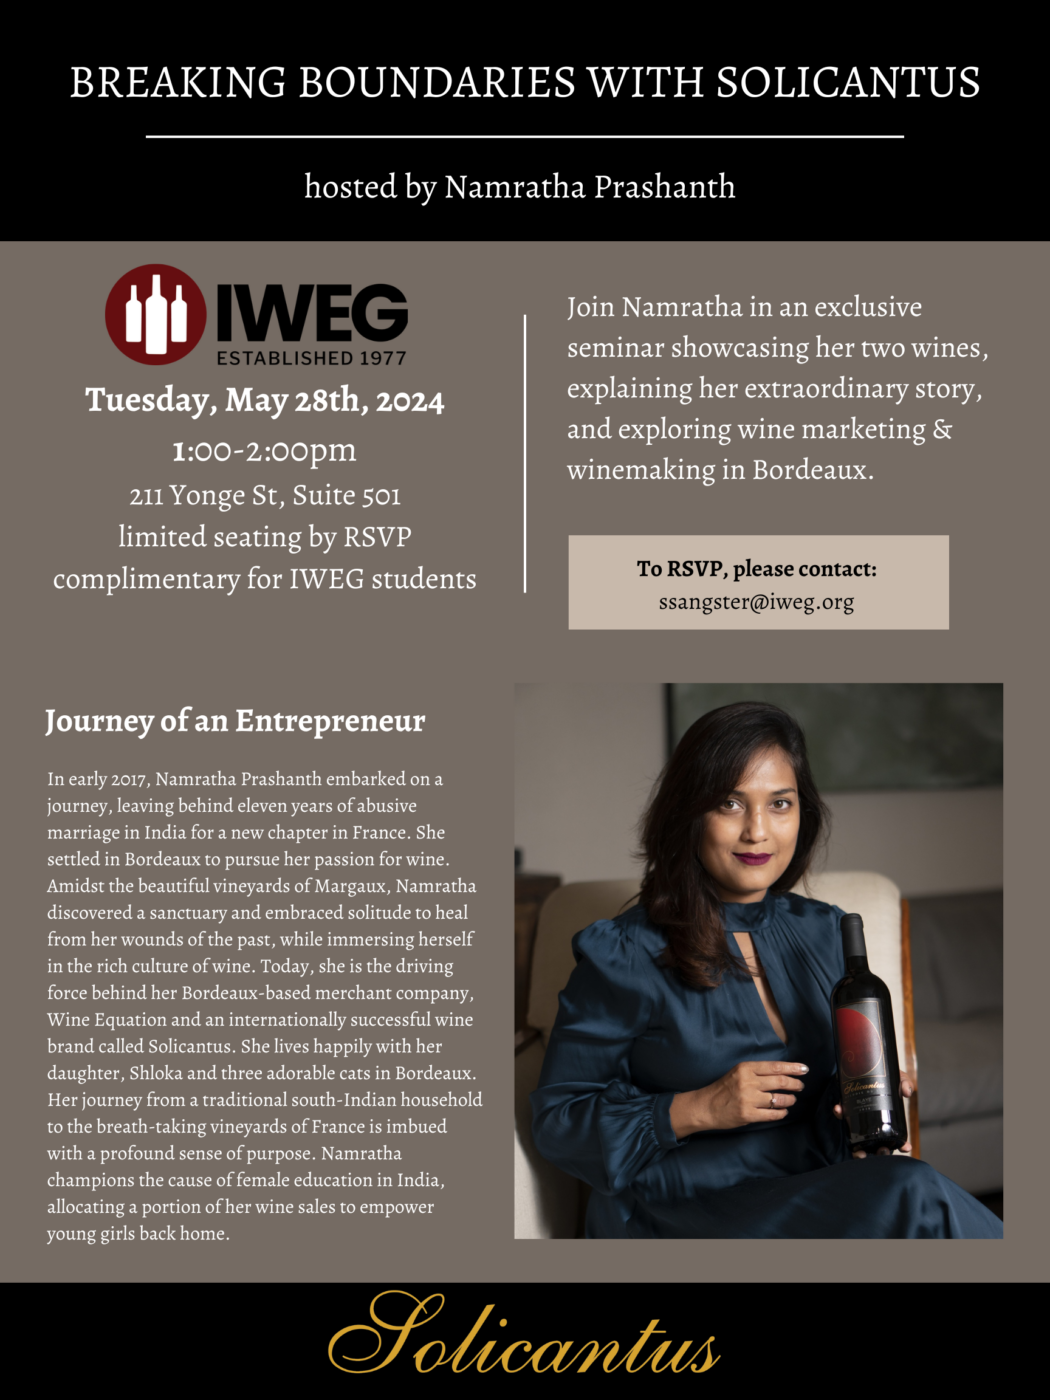 Join Namratha in an exclusive seminar showcasing her two wines, explaining her extraordinary story, and exploring wine marketing & winemaking in Bordeaux.